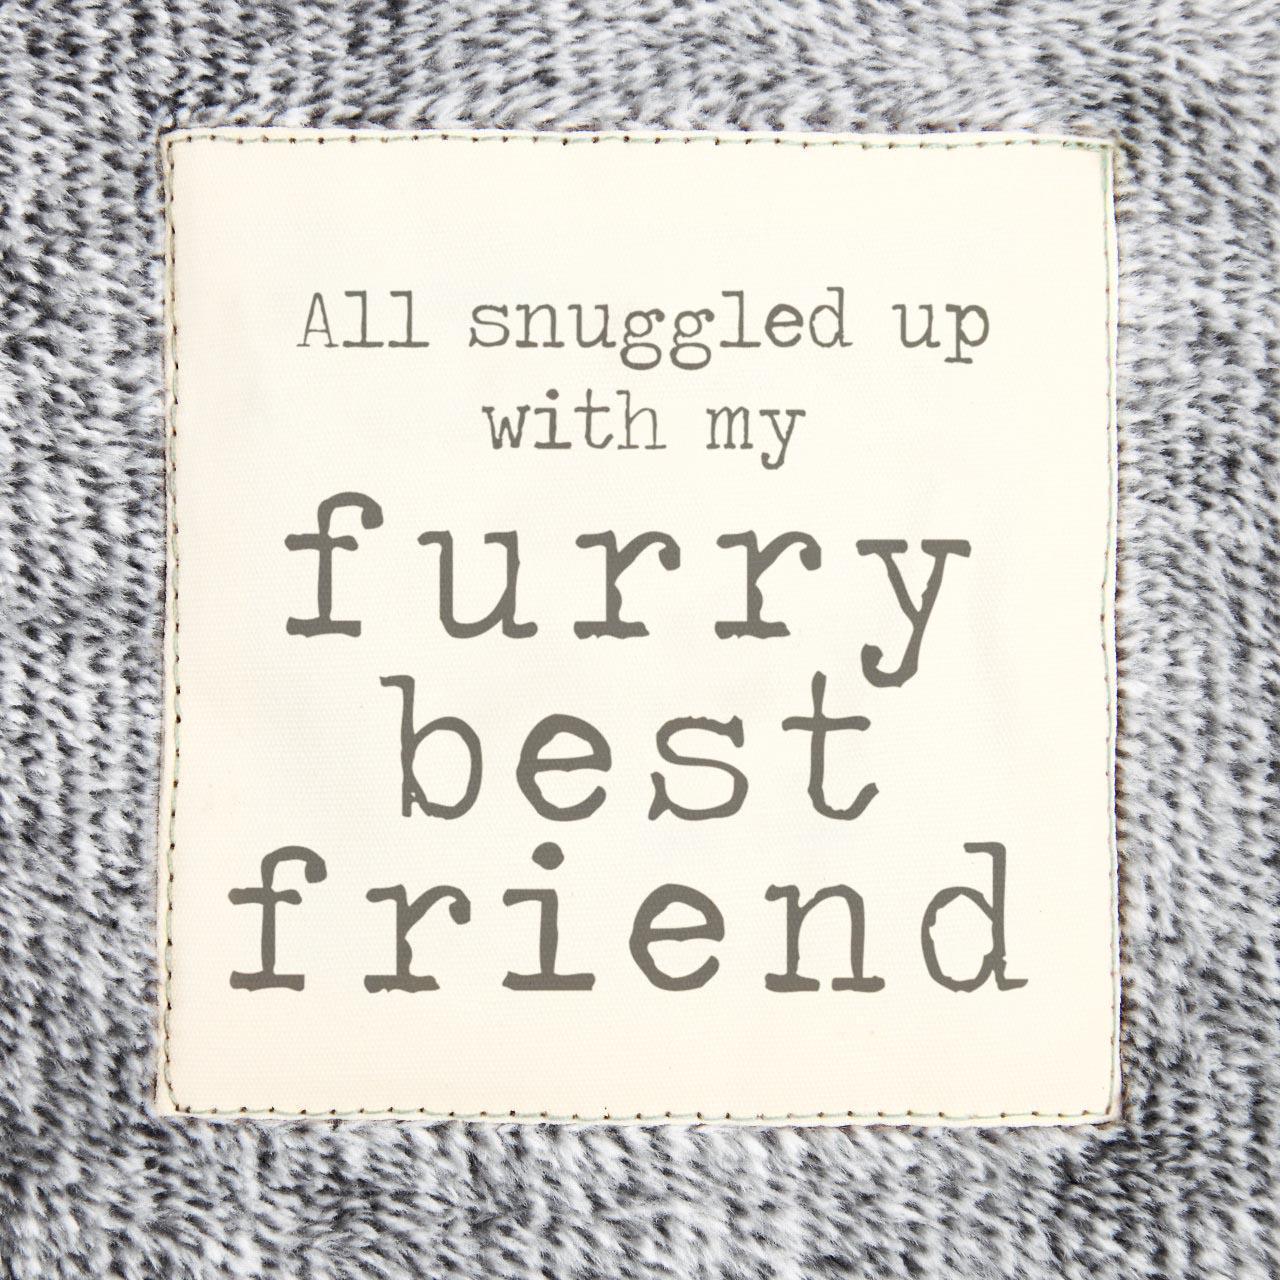 photo of the sentiment in a tag on the blanket that says "All snuggled up with my furry best friend"